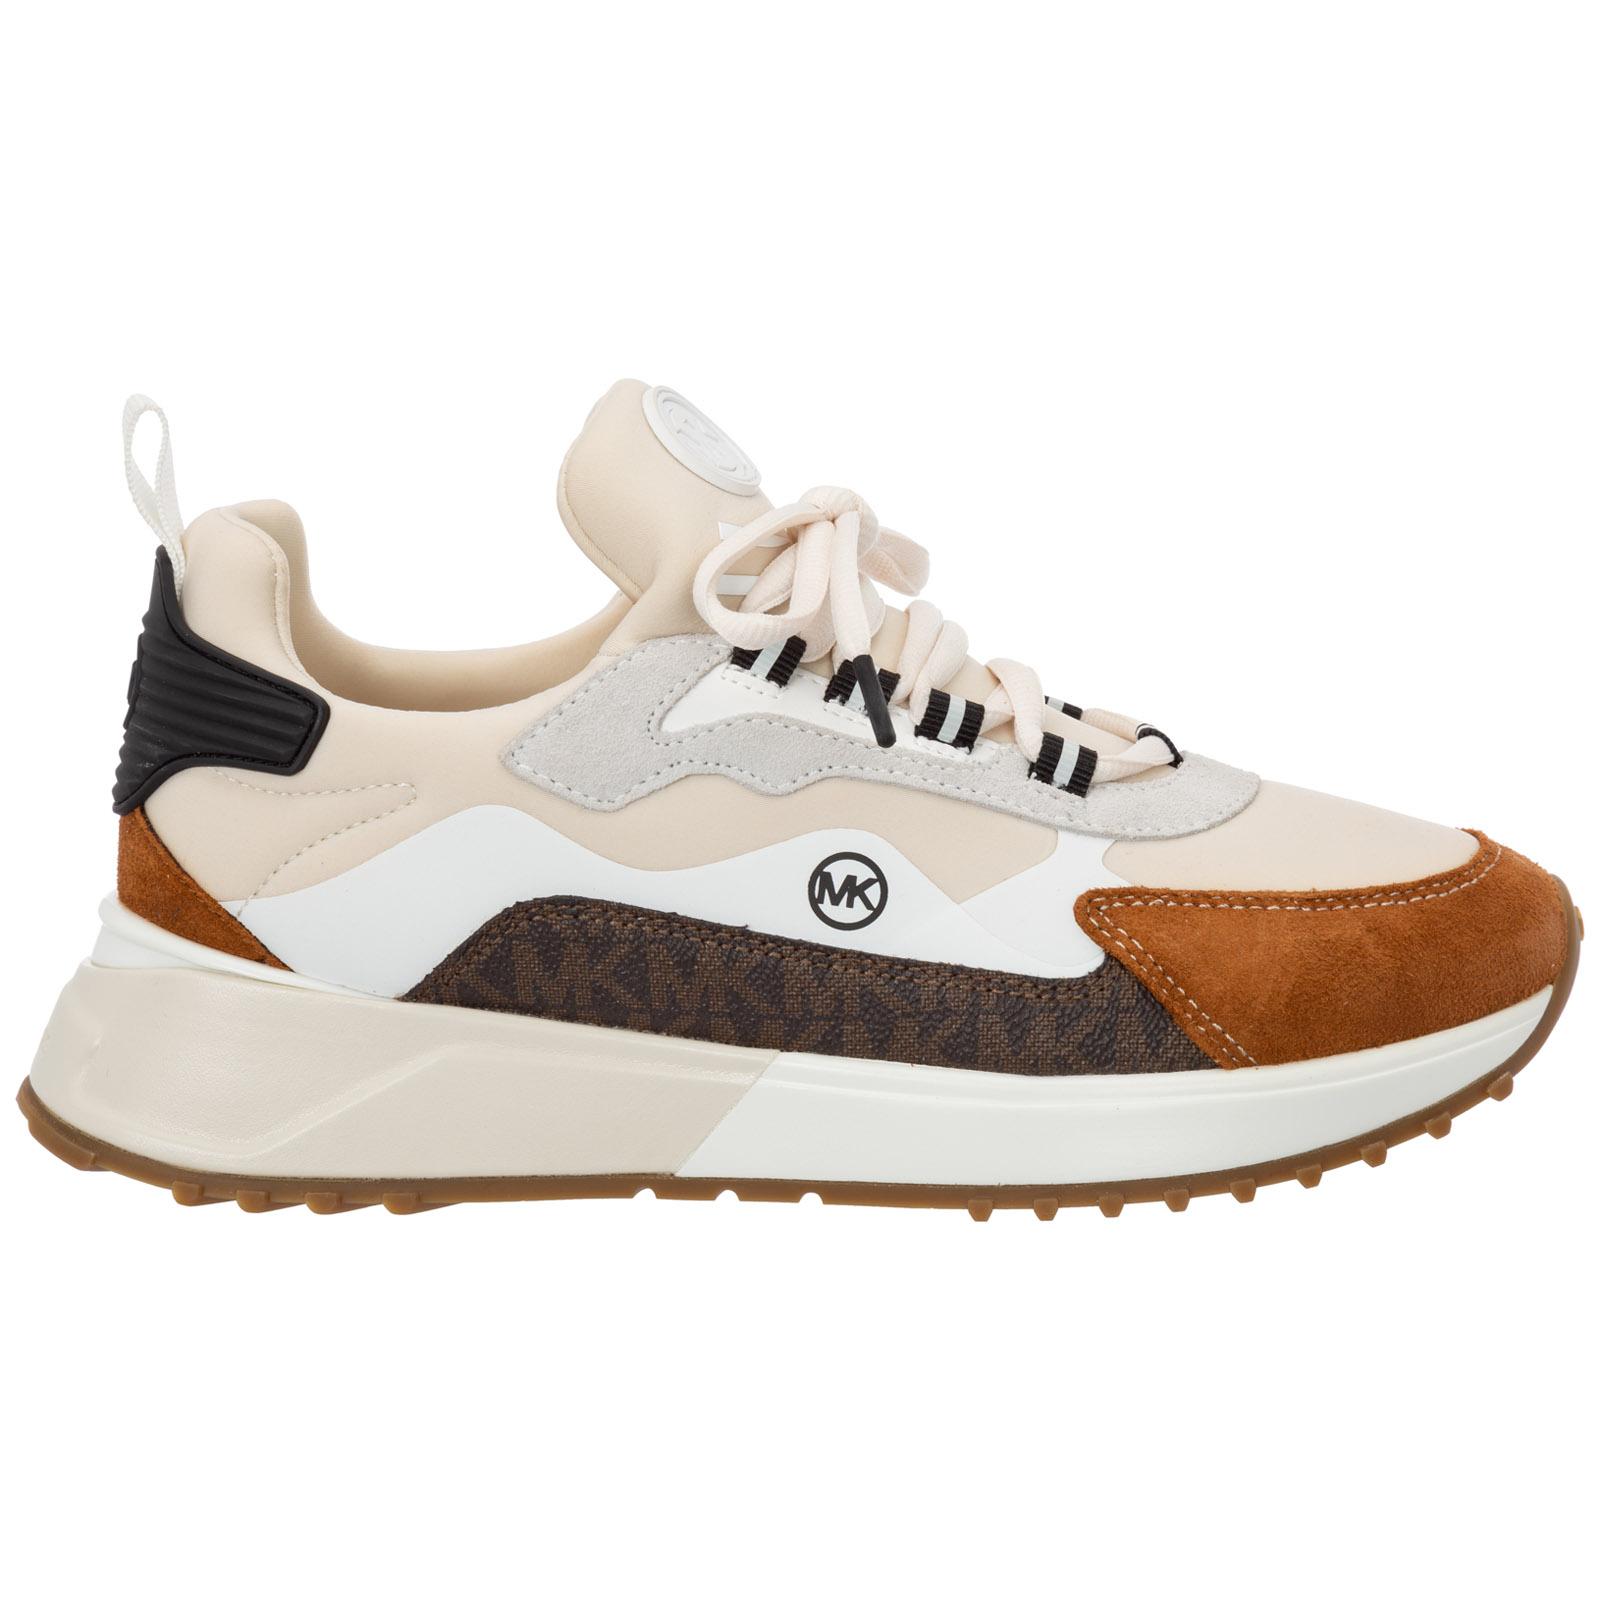 Michael Kors Shoes Leather Trainers Sneakers Theo Sport in Natural | Lyst